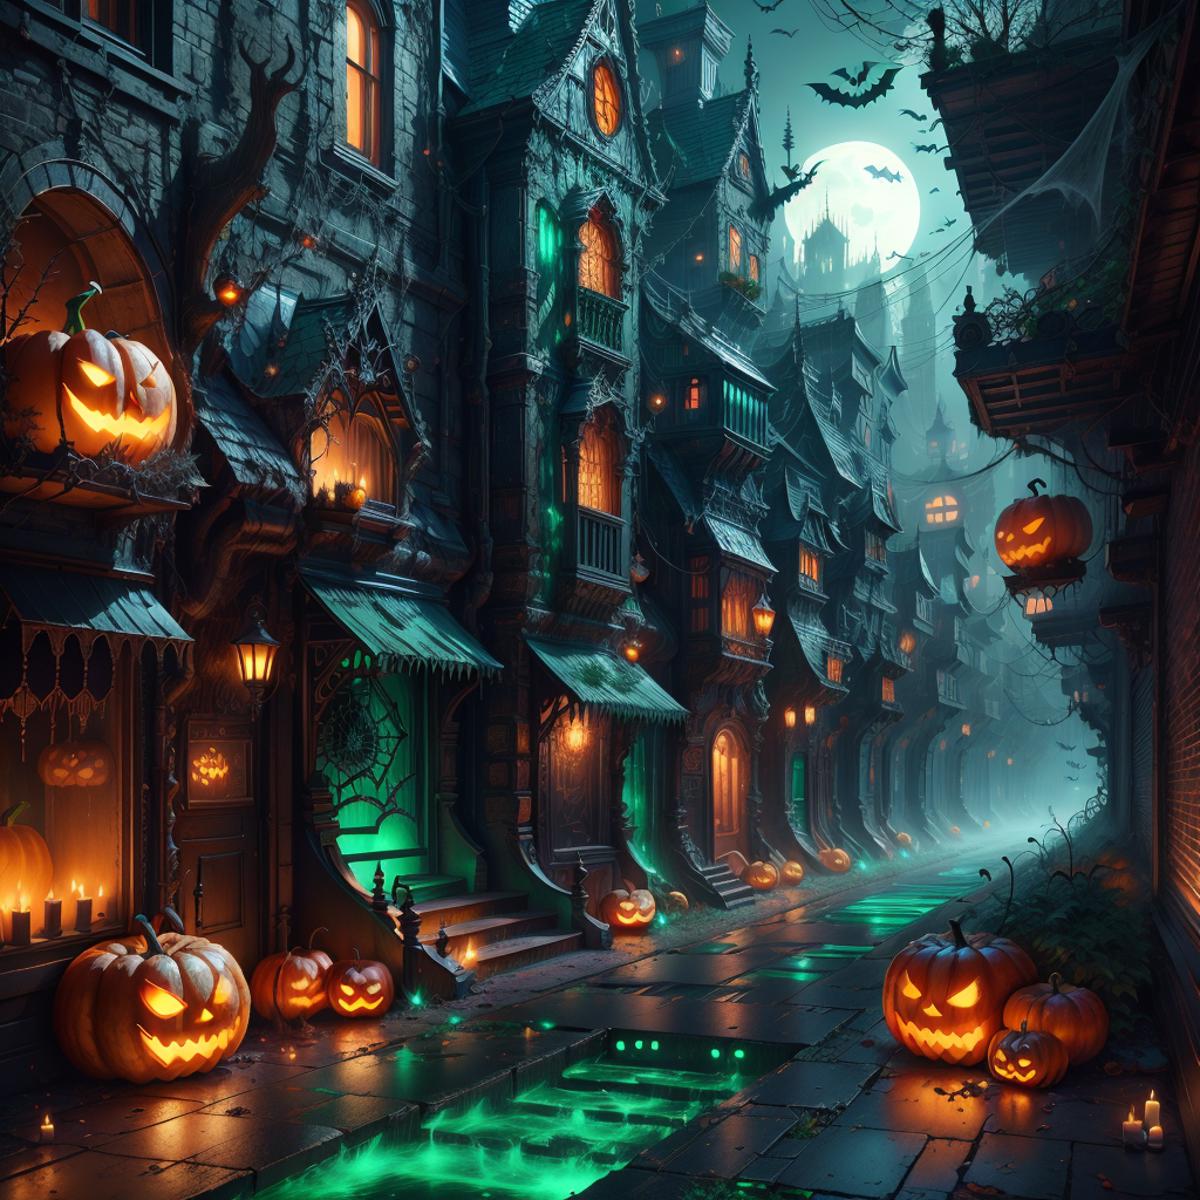 Pumpkin-lit Halloween street with haunted houses and spooky atmosphere